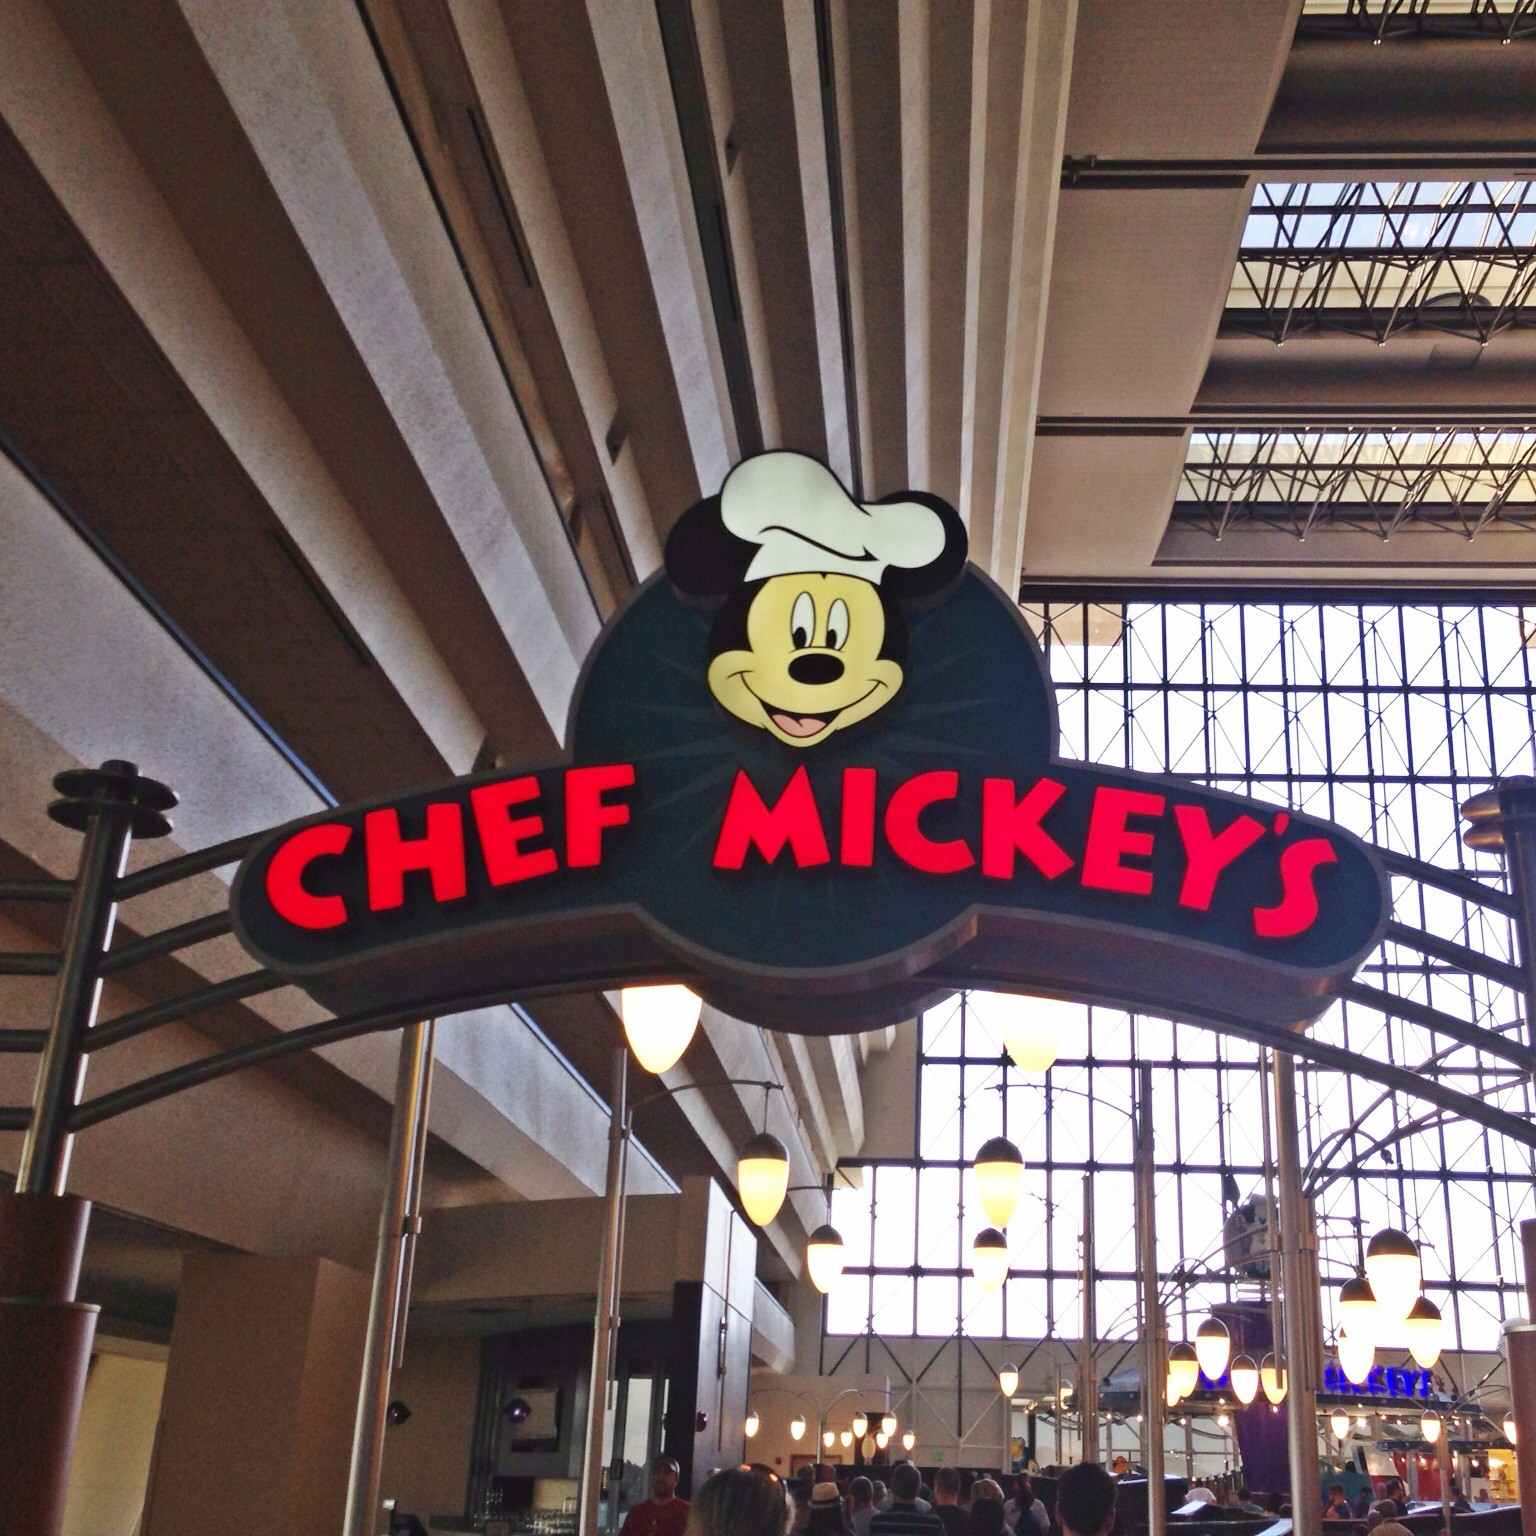 Chef Mickey’s Breakfast: How To Get There, Having A Delicious Time!